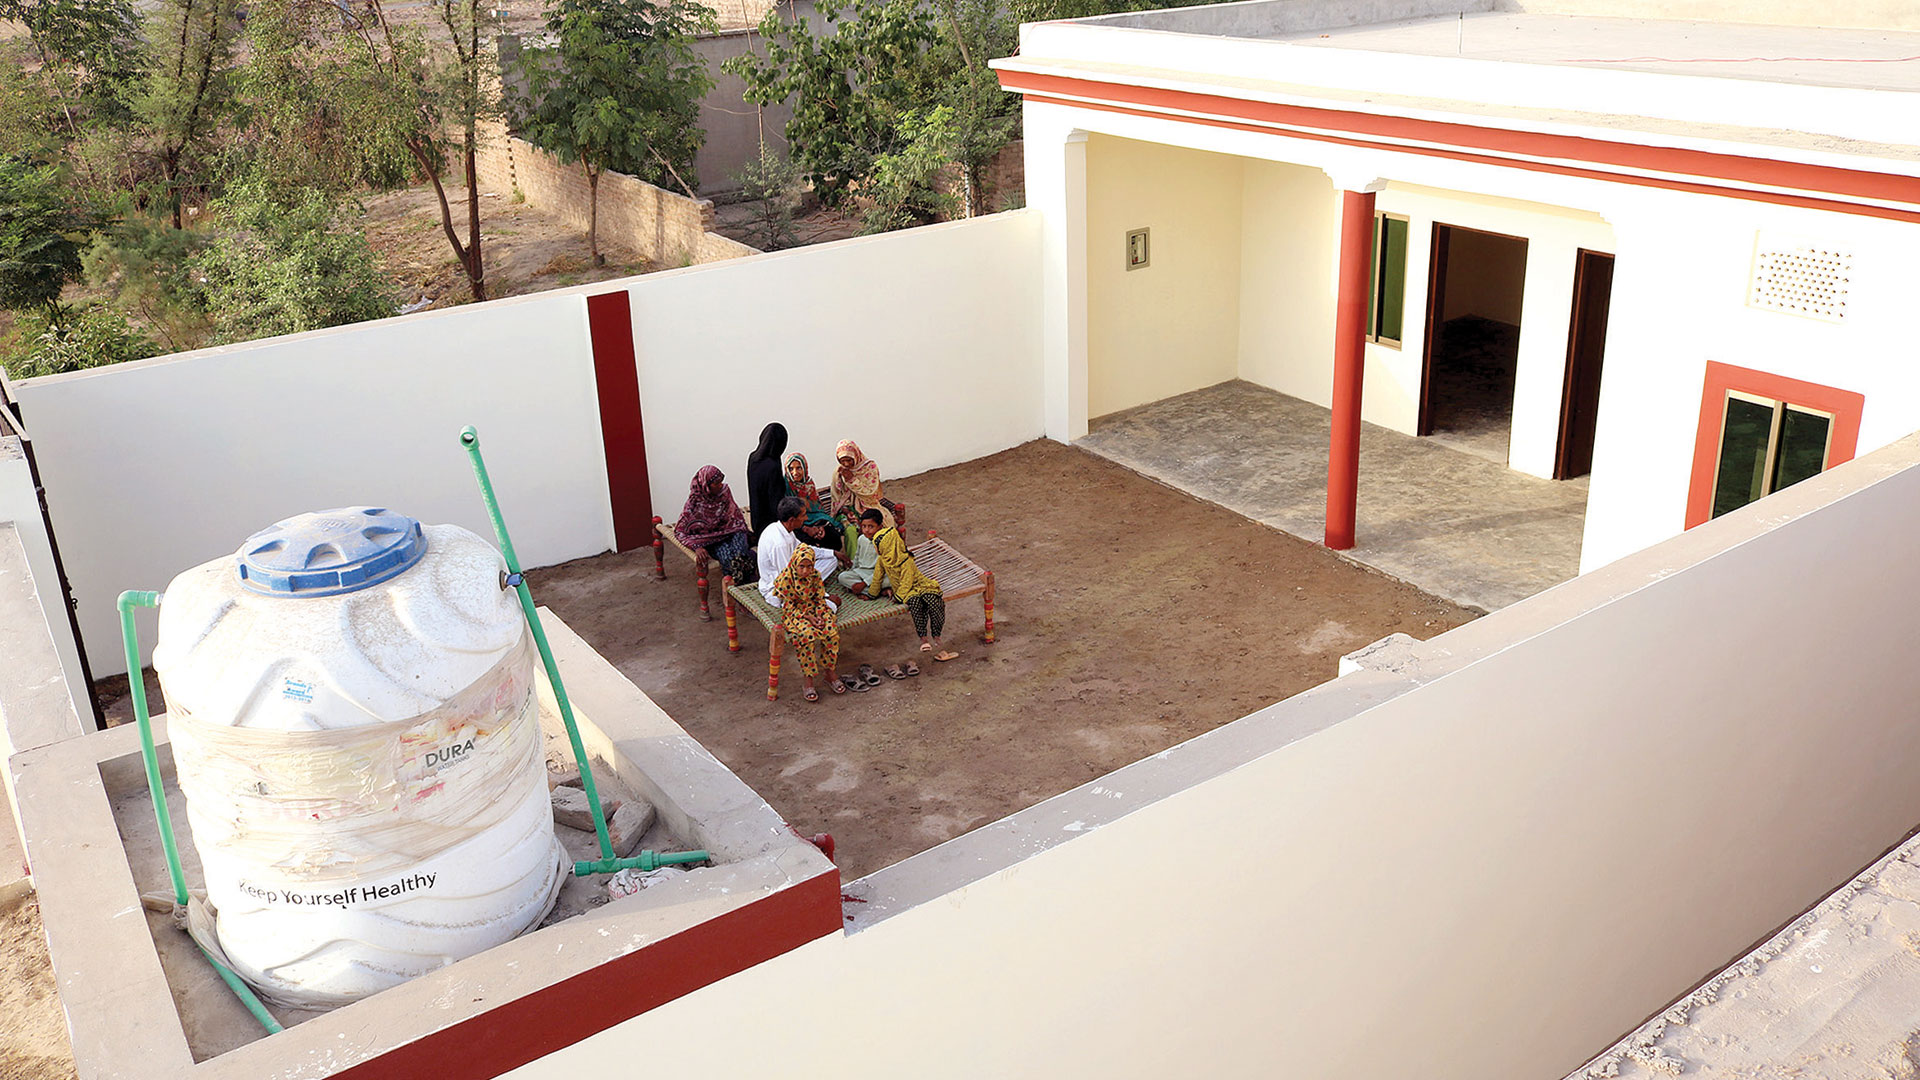 Qatar Charity builds social housing for poor in Pakistan